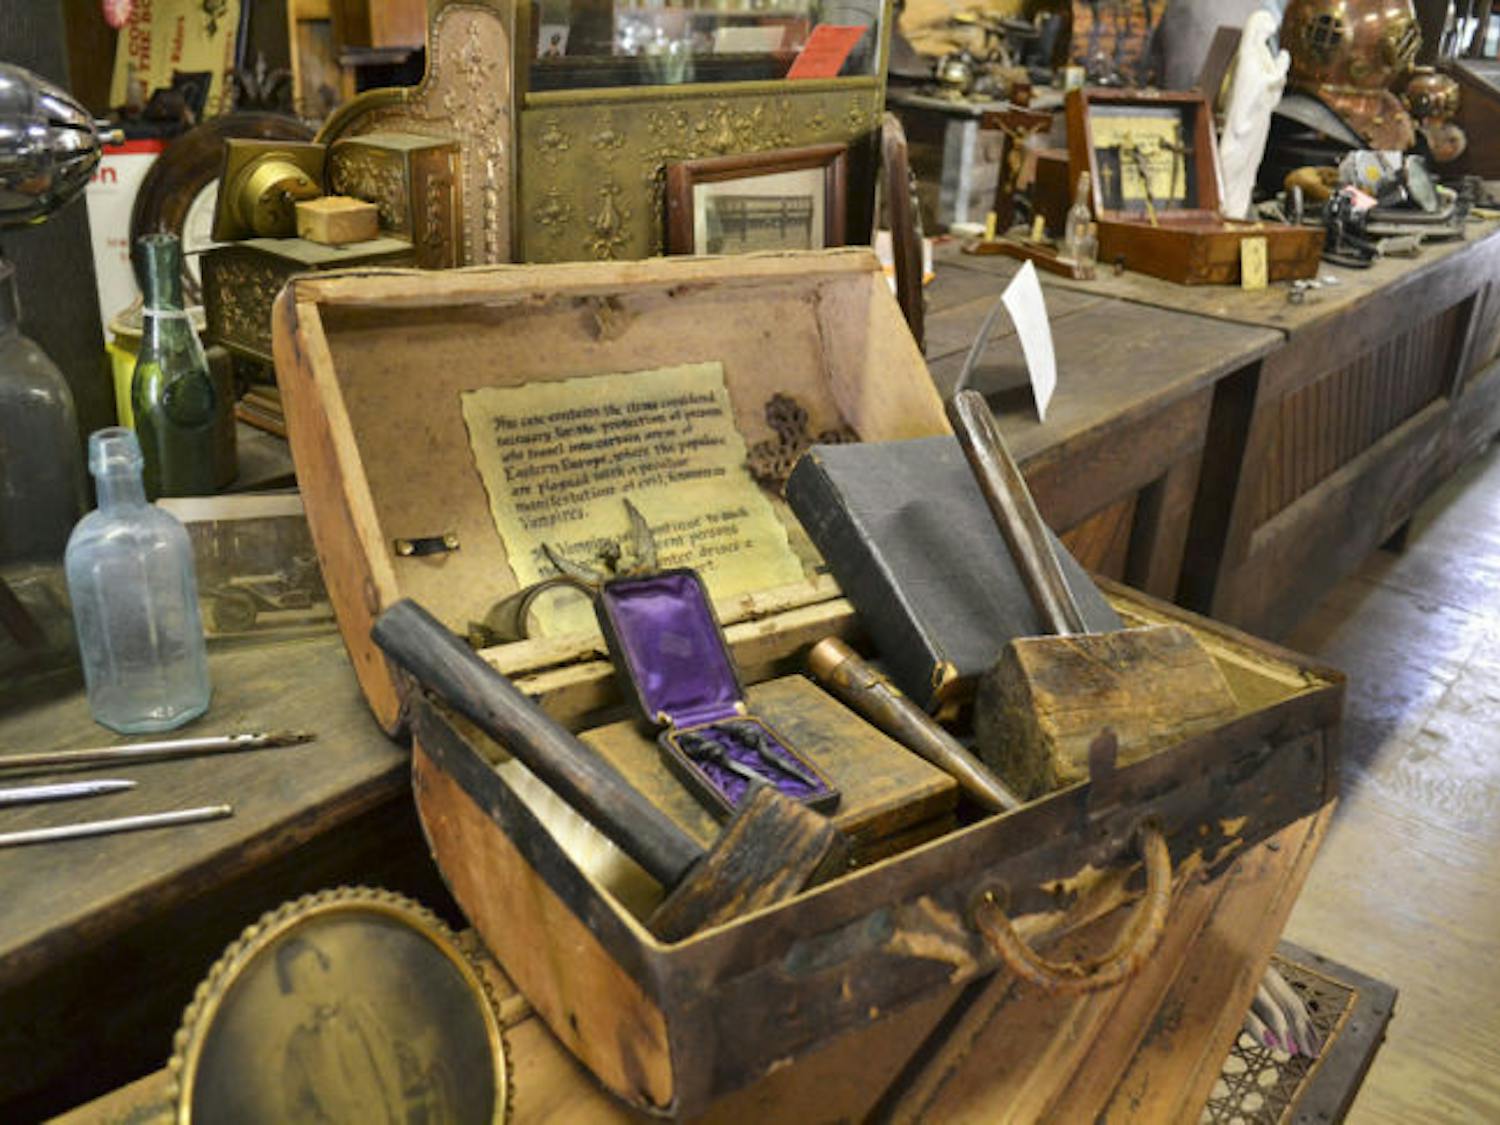 A vampire-slaying kit sits among similarly weird items at Comanche Moon Curios, a store for eclectic items near McIntosh, Fla.&nbsp;
&nbsp;